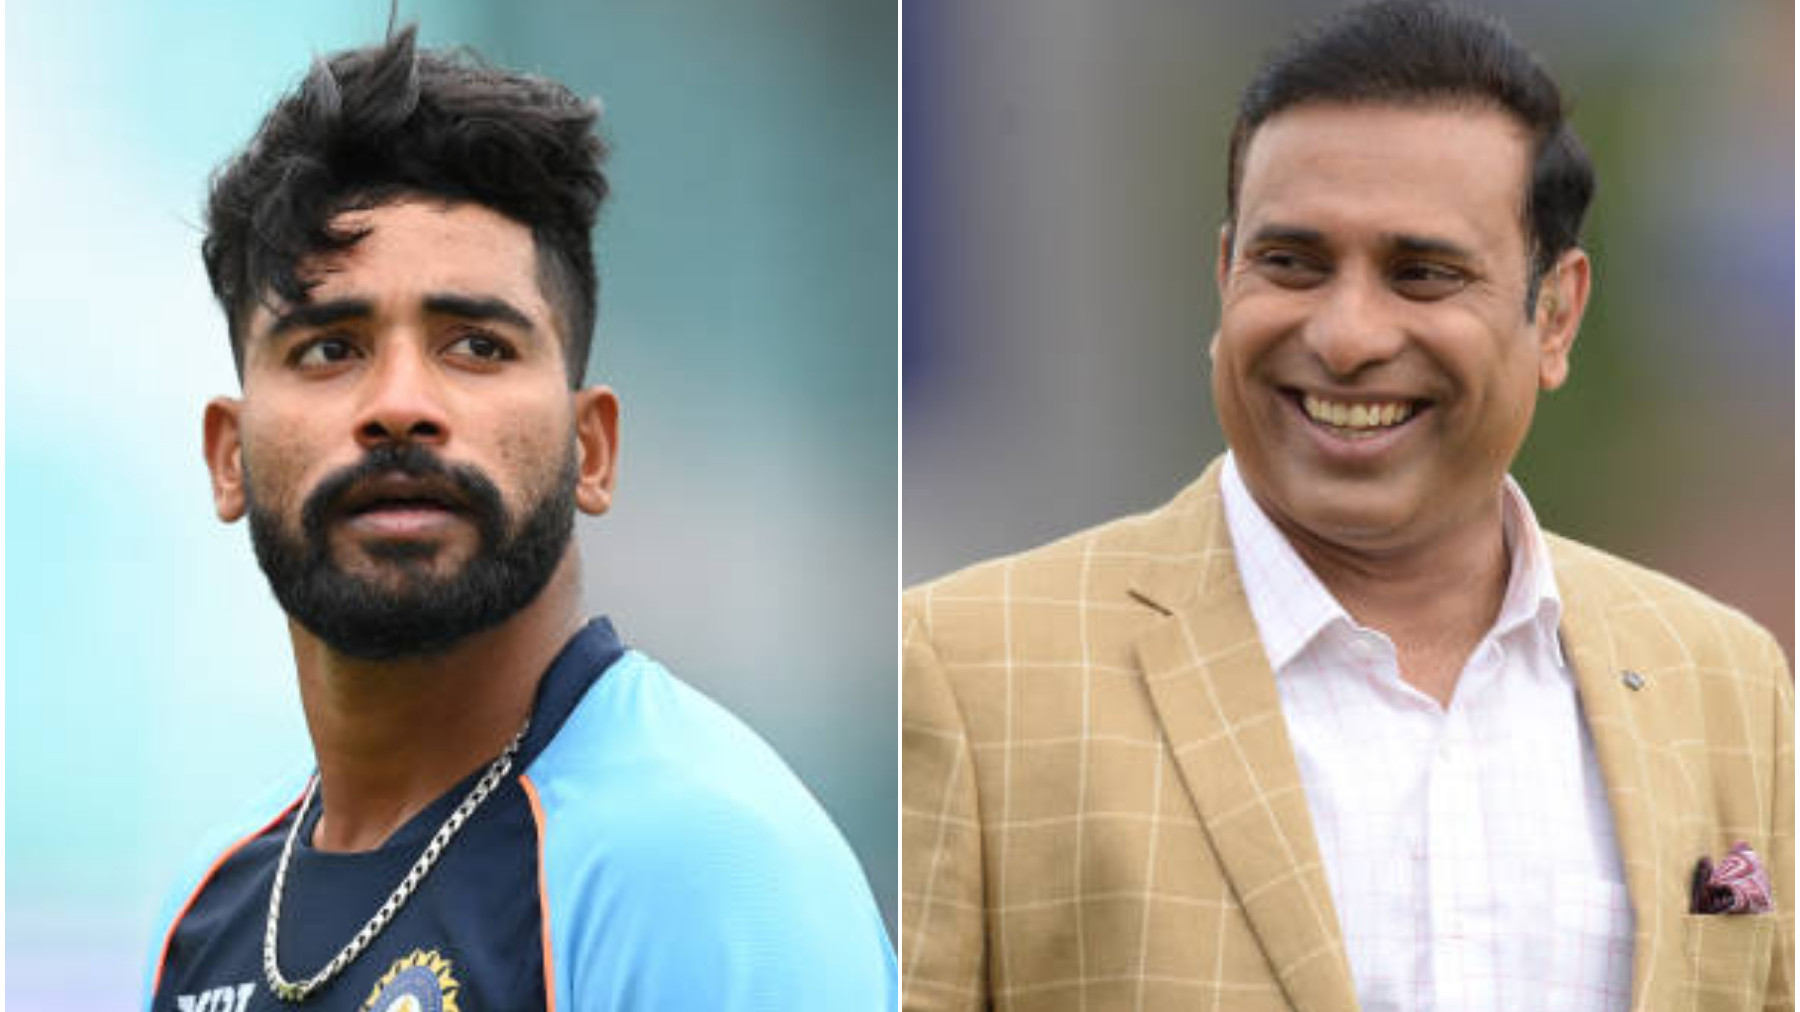 ENG v IND 2021: I feel Mohammed Siraj is carrying a niggle- VVS Laxman 